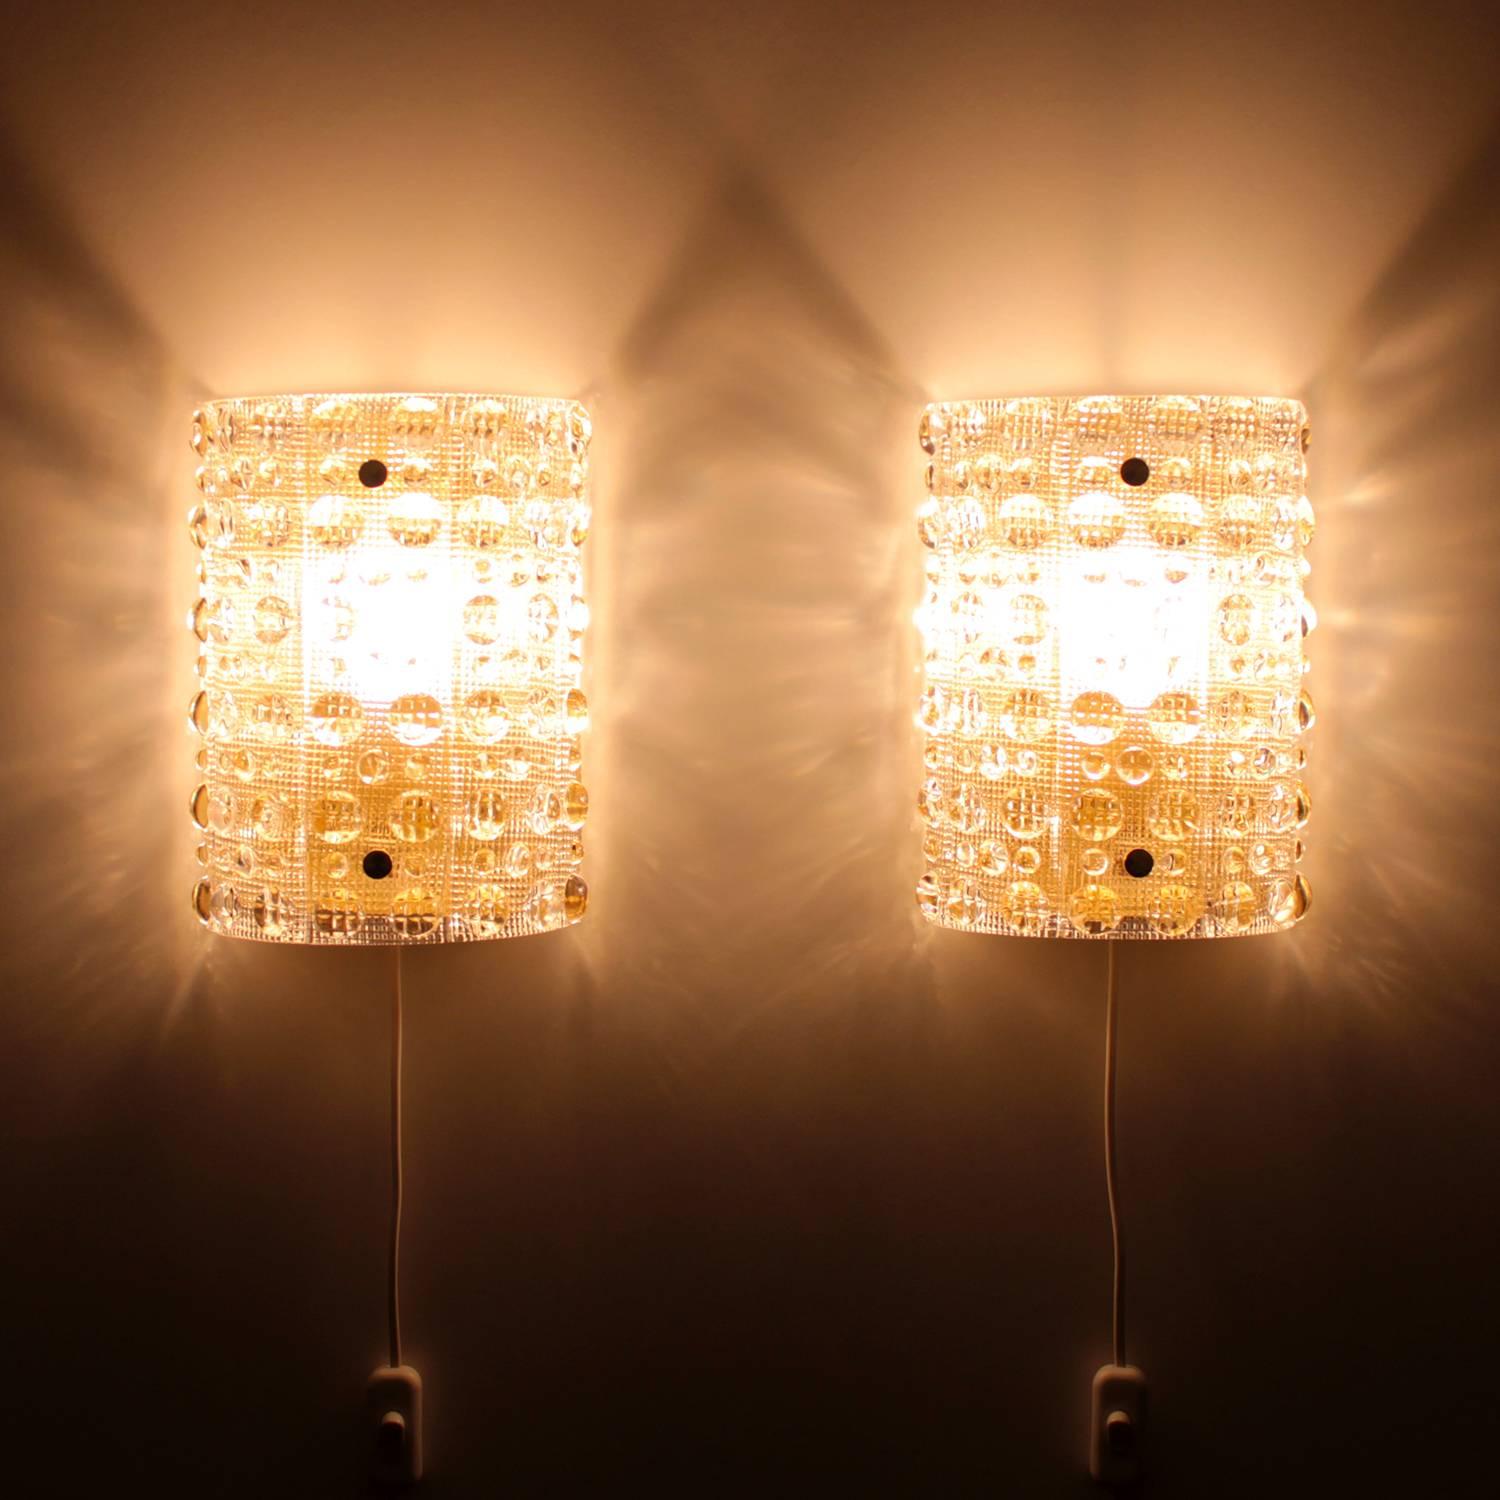 Crystal sconces, pair of wall lamps by Carl Fagerlund for Orrefors, in the late 1950s-early 1960s, absolutely gorgeous and rare pair of crystal wall lights.

A pair of magnificent crystal glass sconces that oozes Swedish glass design at its best,